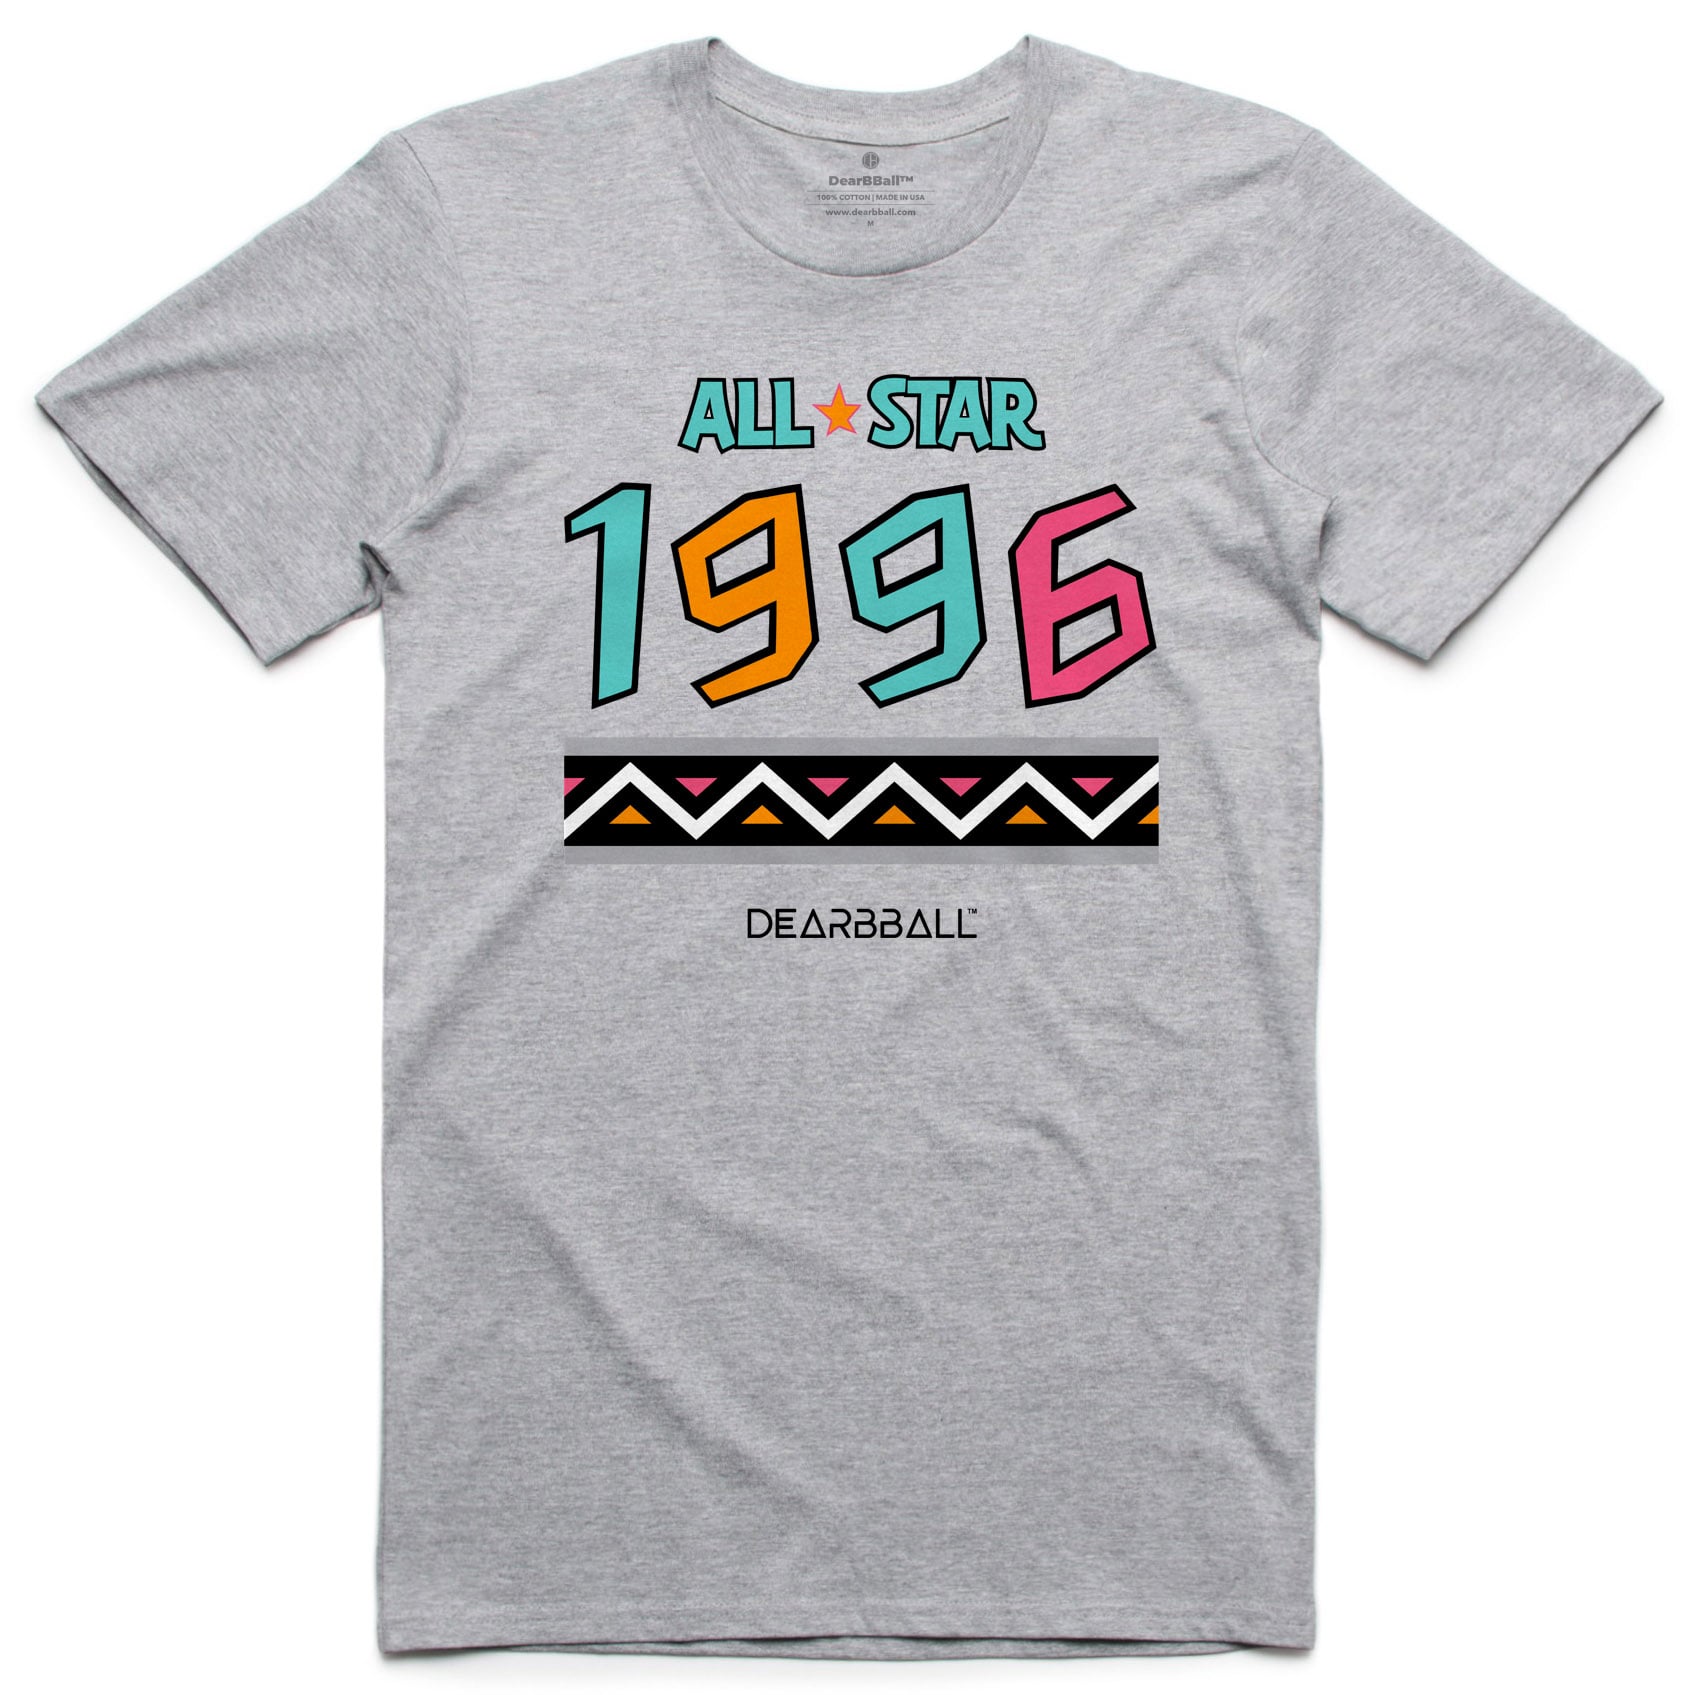 DearBBall T-Shirt - All Star 1996 Limited Edition